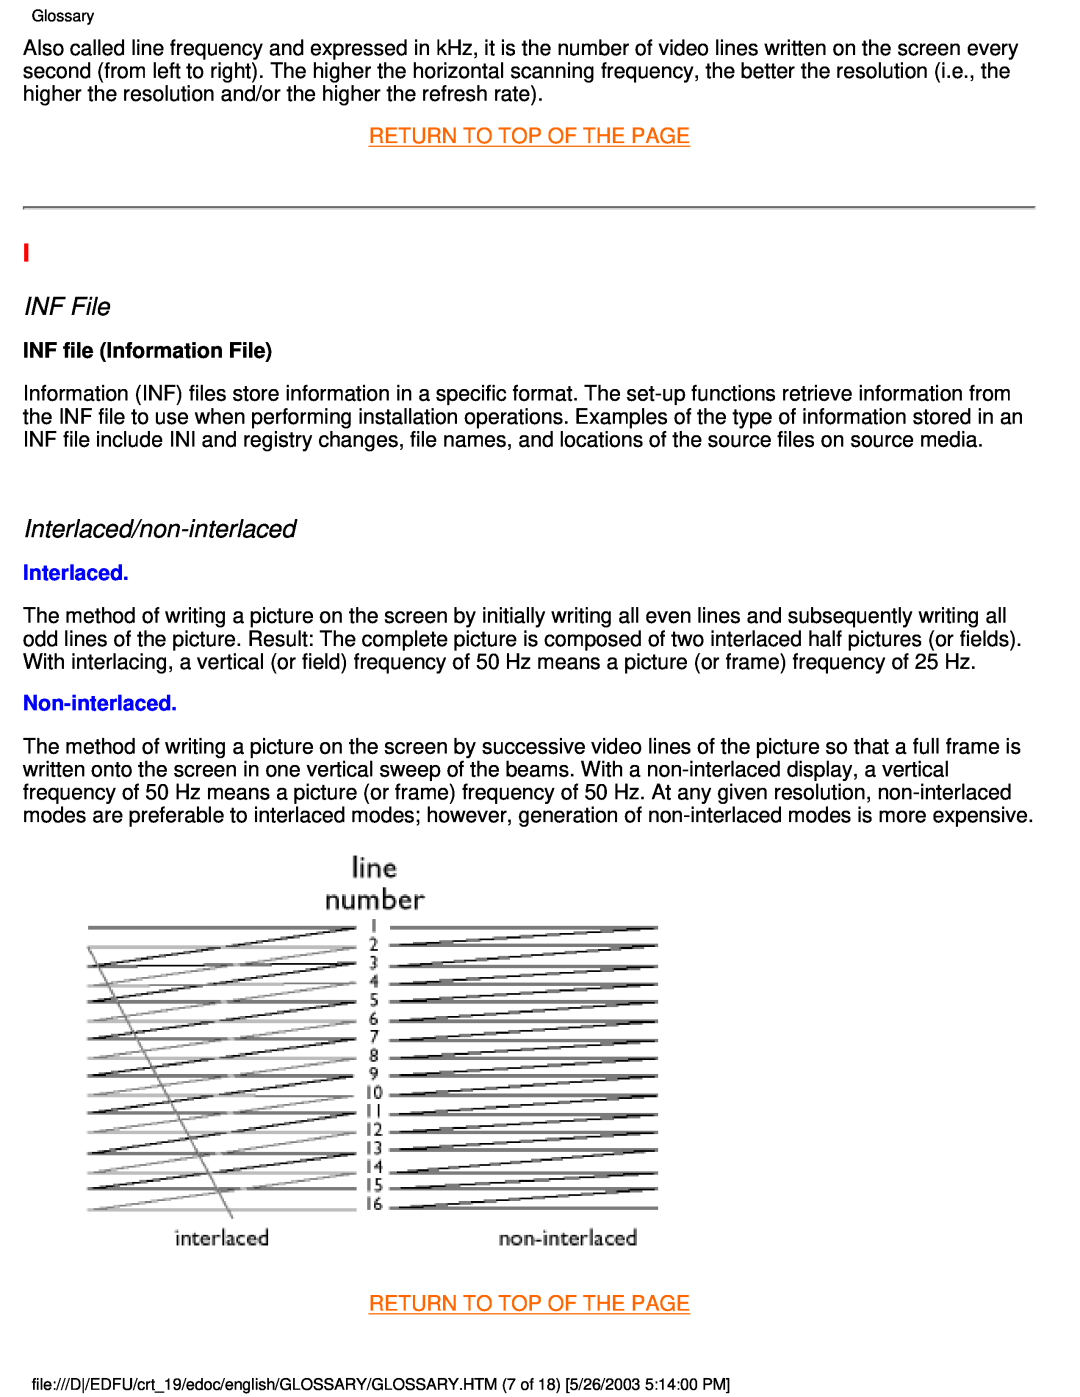 Philips 109E5 INF File, Interlaced/non-interlaced, Return To Top Of The Page, INF file Information File, Non-interlaced 